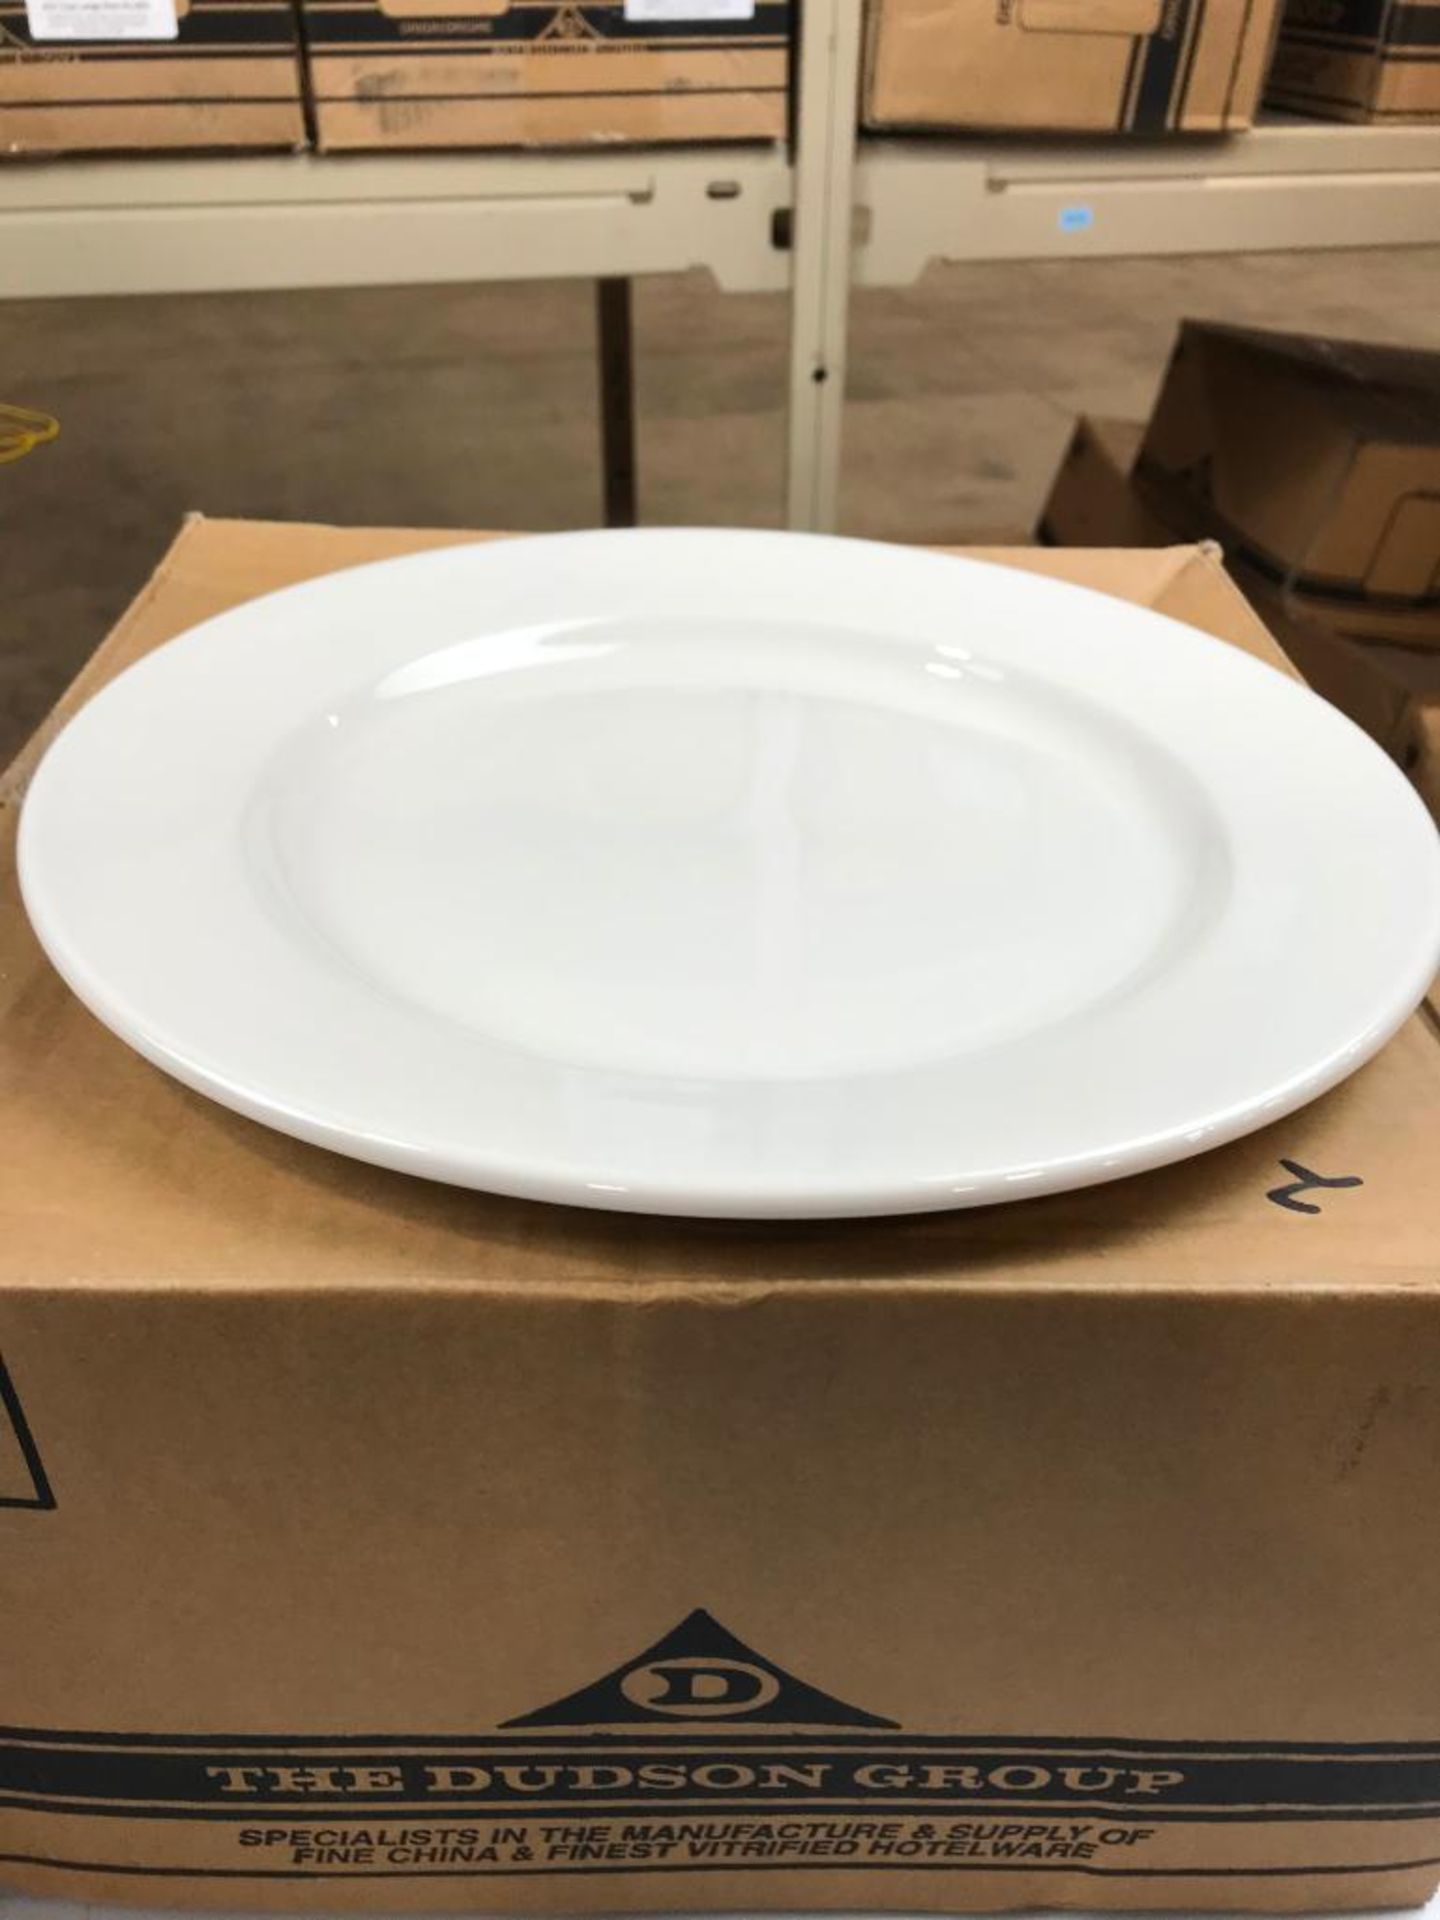 2 CASES OF DUDSON CLASSIC PLATE 12.5" - 12/CASE, MADE IN ENGLAND - Image 4 of 6